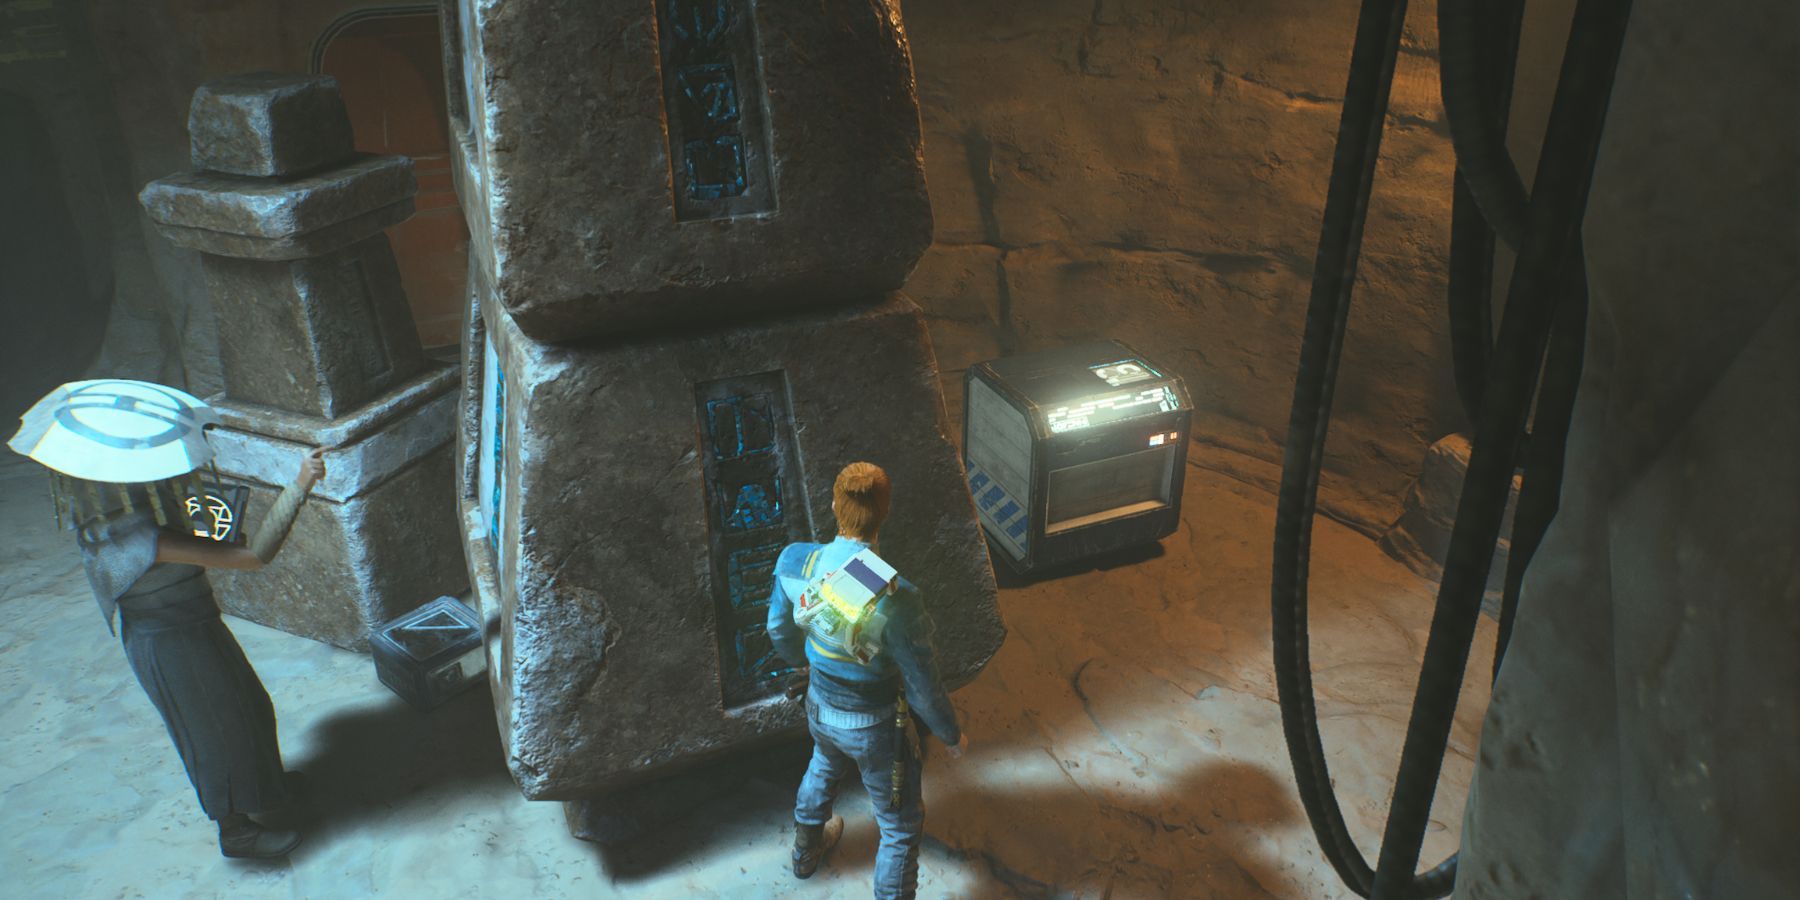 image showing the location of the hidden chest in the desert passages of star wars jedi survivor.